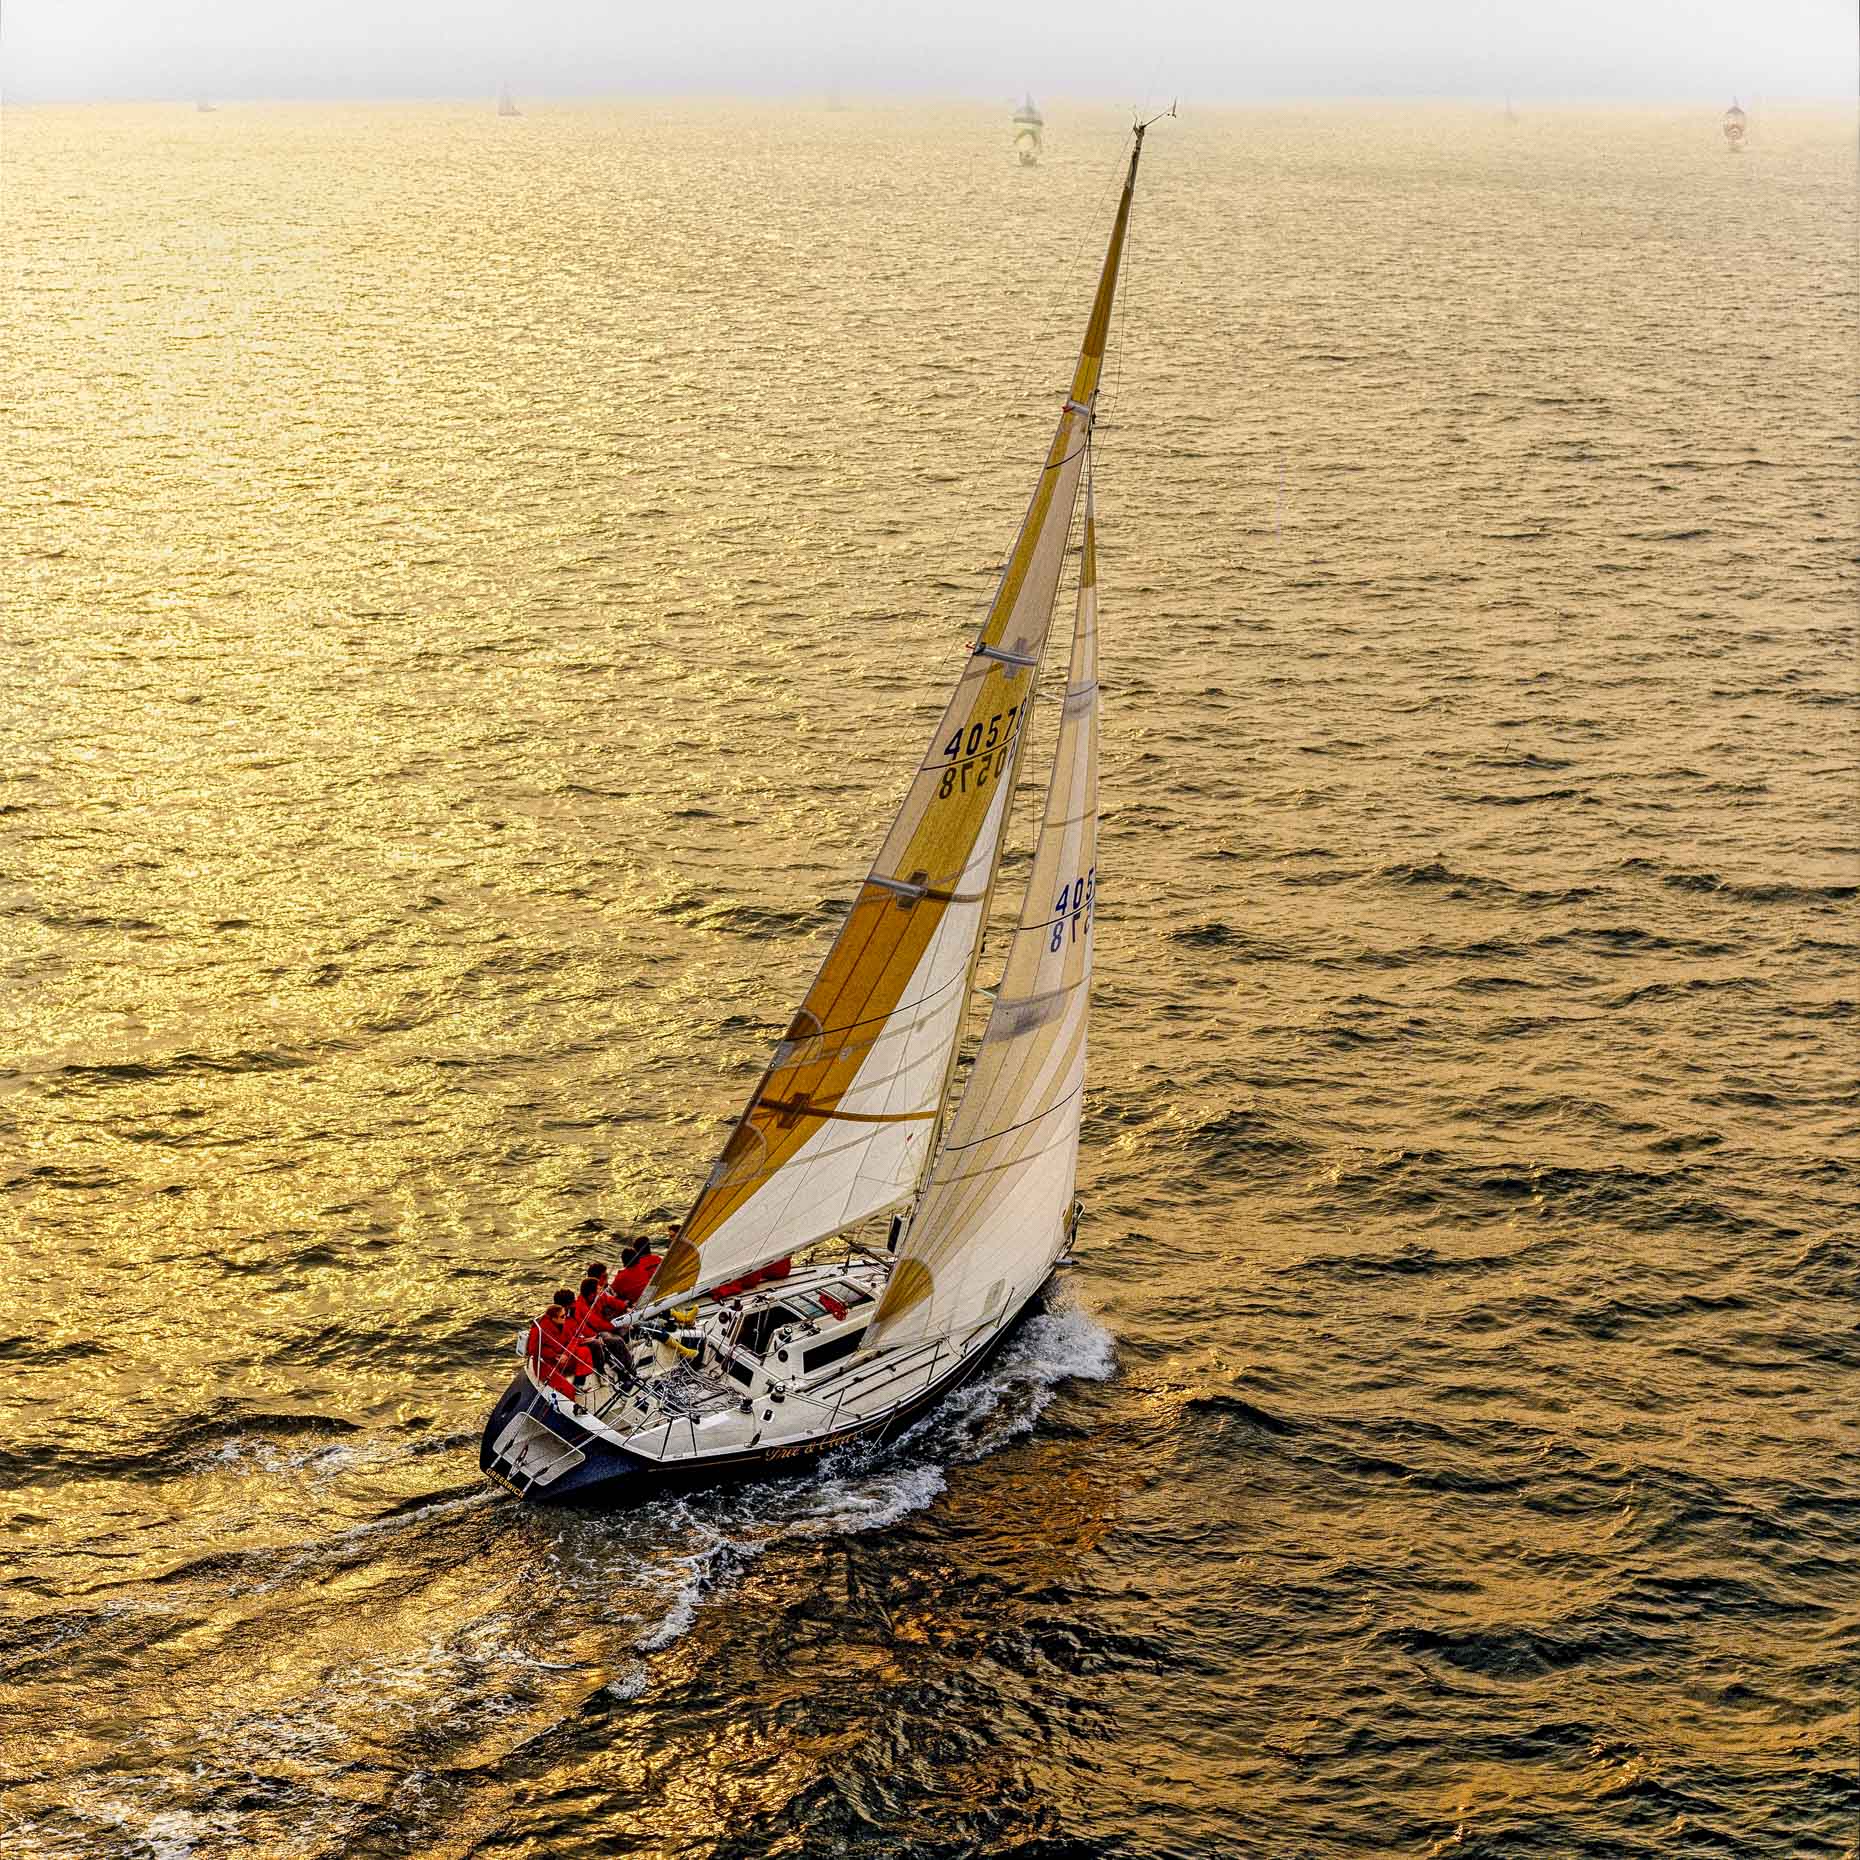 Yachting photography by aerial photographer Stefen Turner